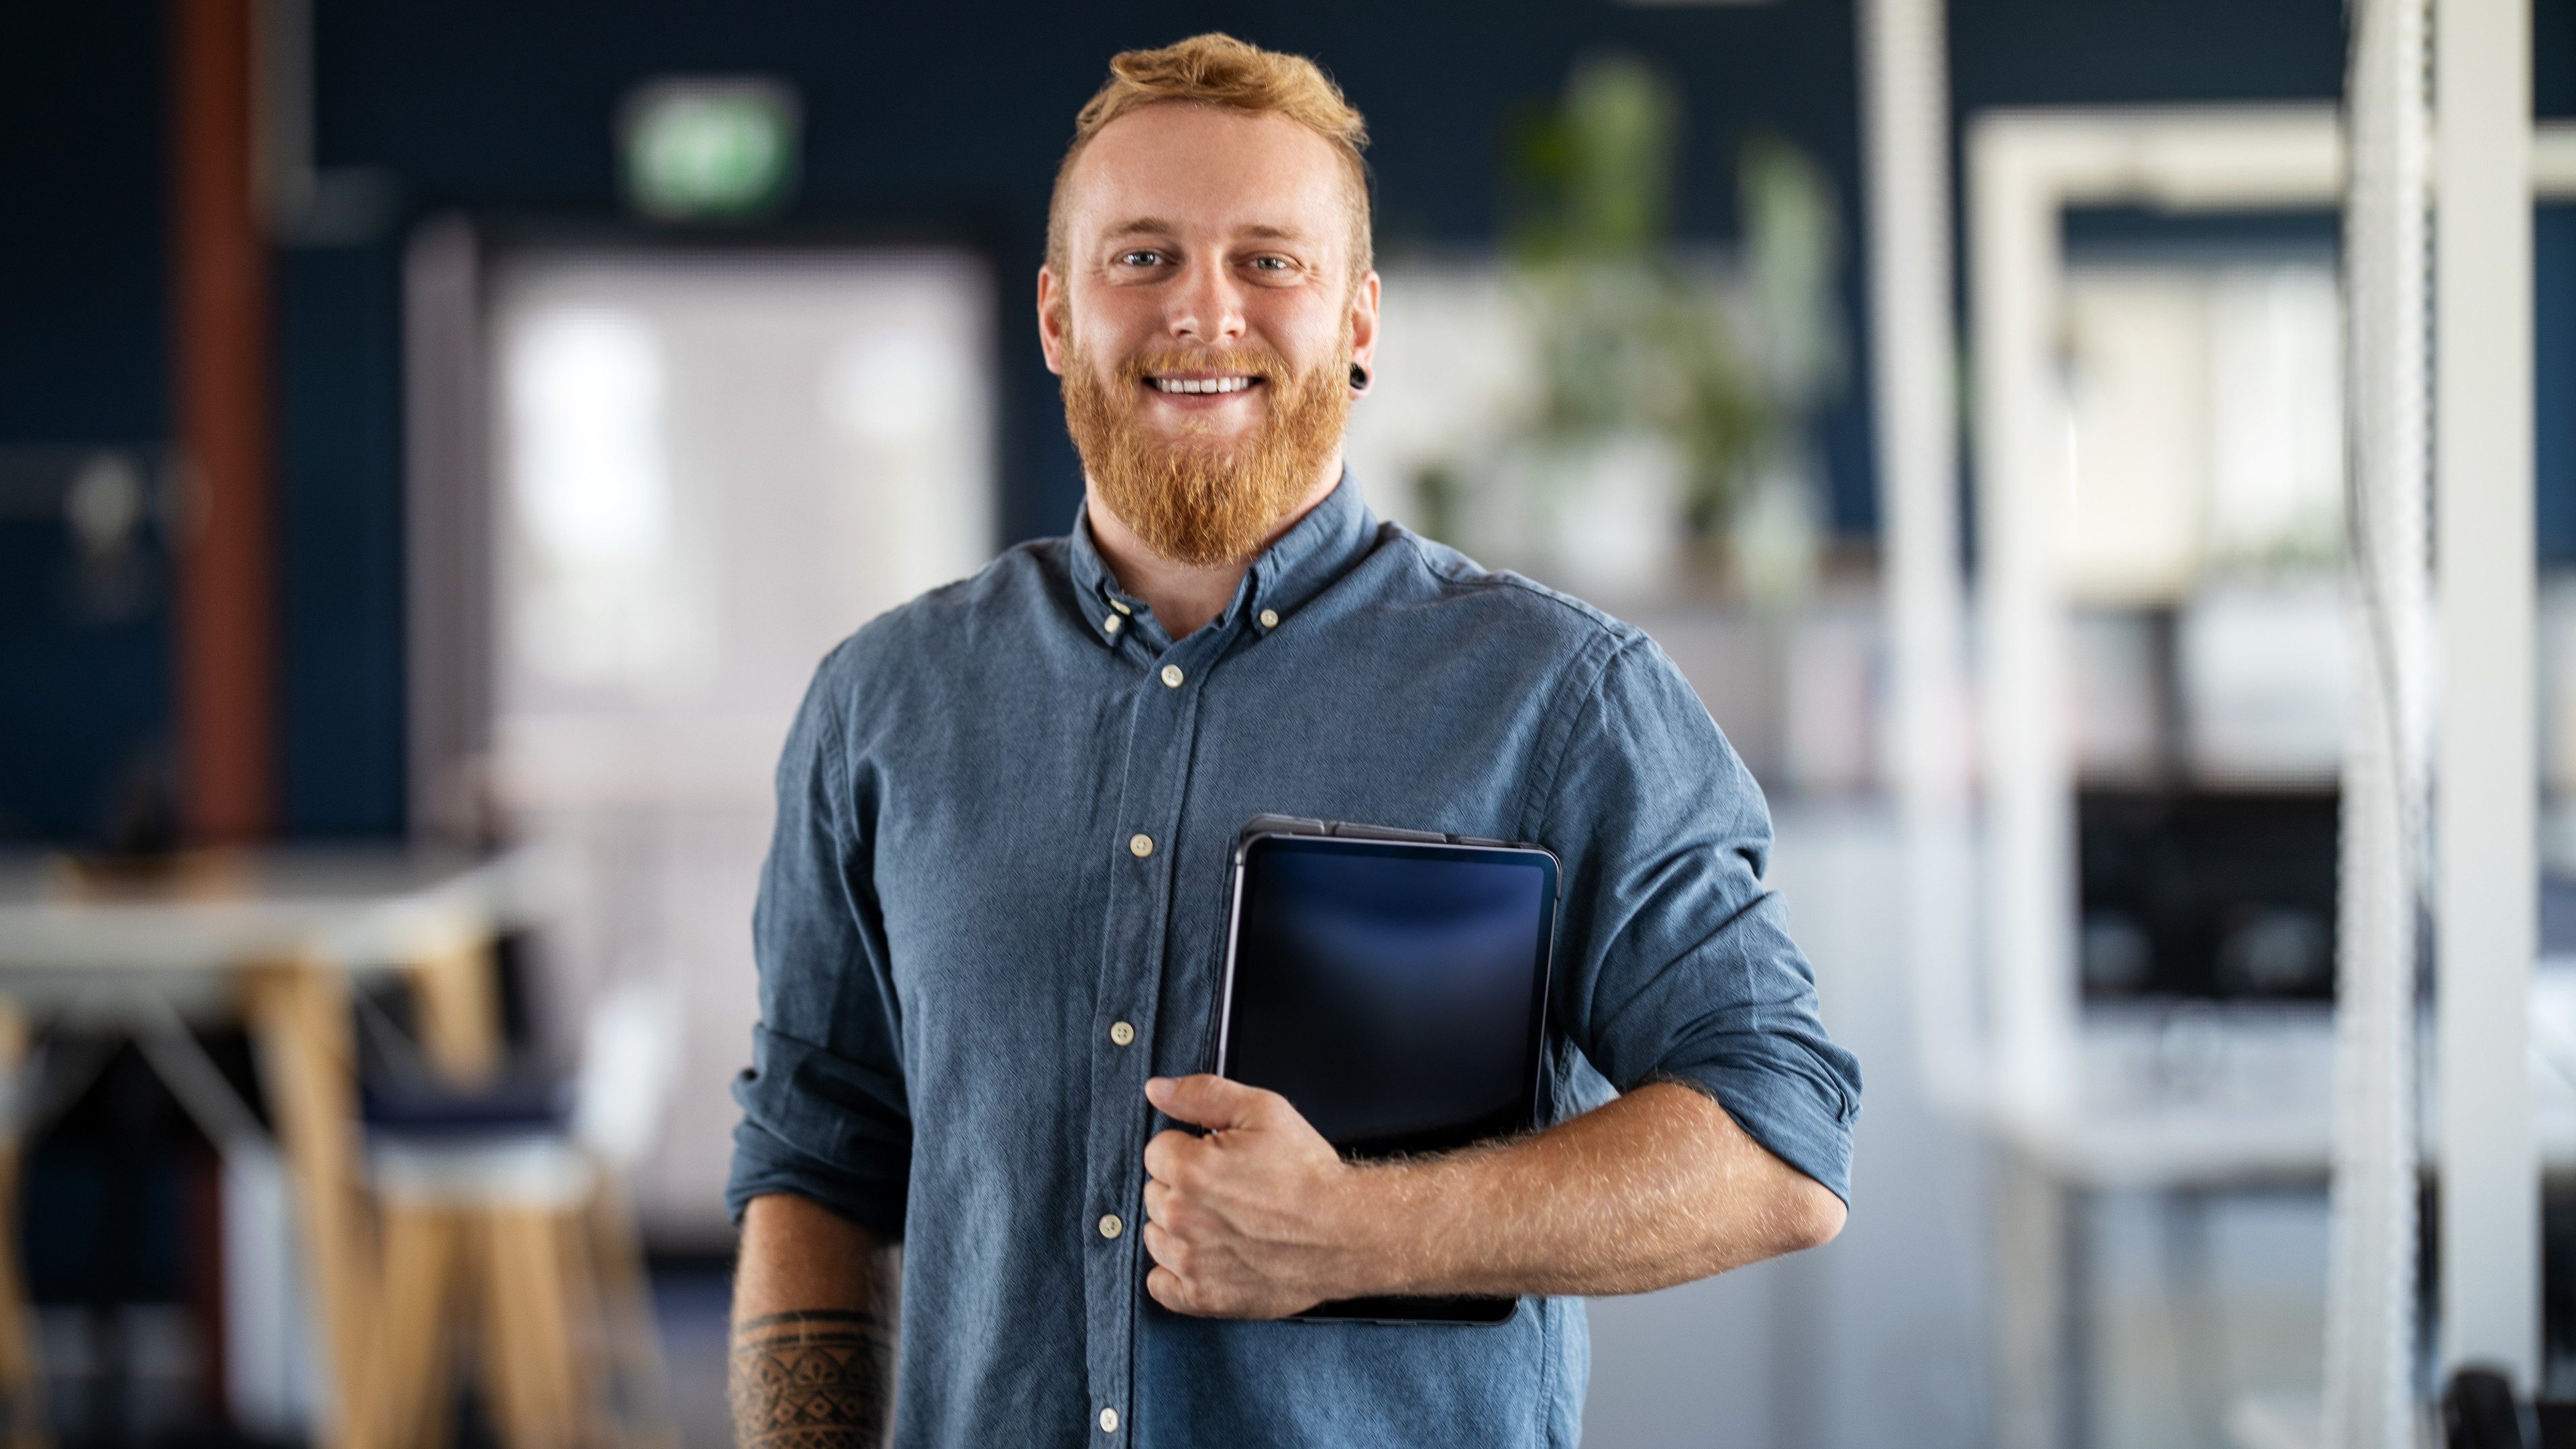 Portrait of a businessman with beard standing in office holding digital tablet. Confident male business executive in office looking at camera.